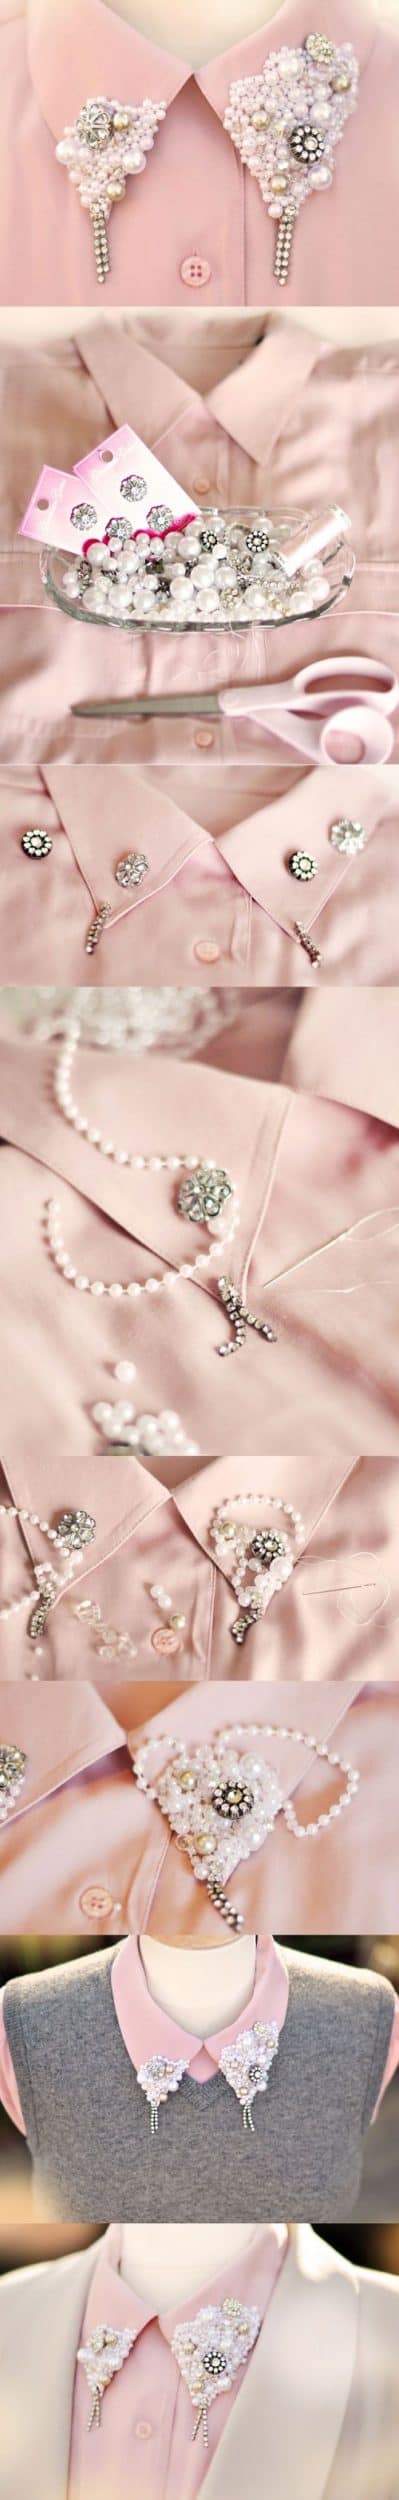 Pretty DIY Pearls Embellished Clothes That Are Easy To Make